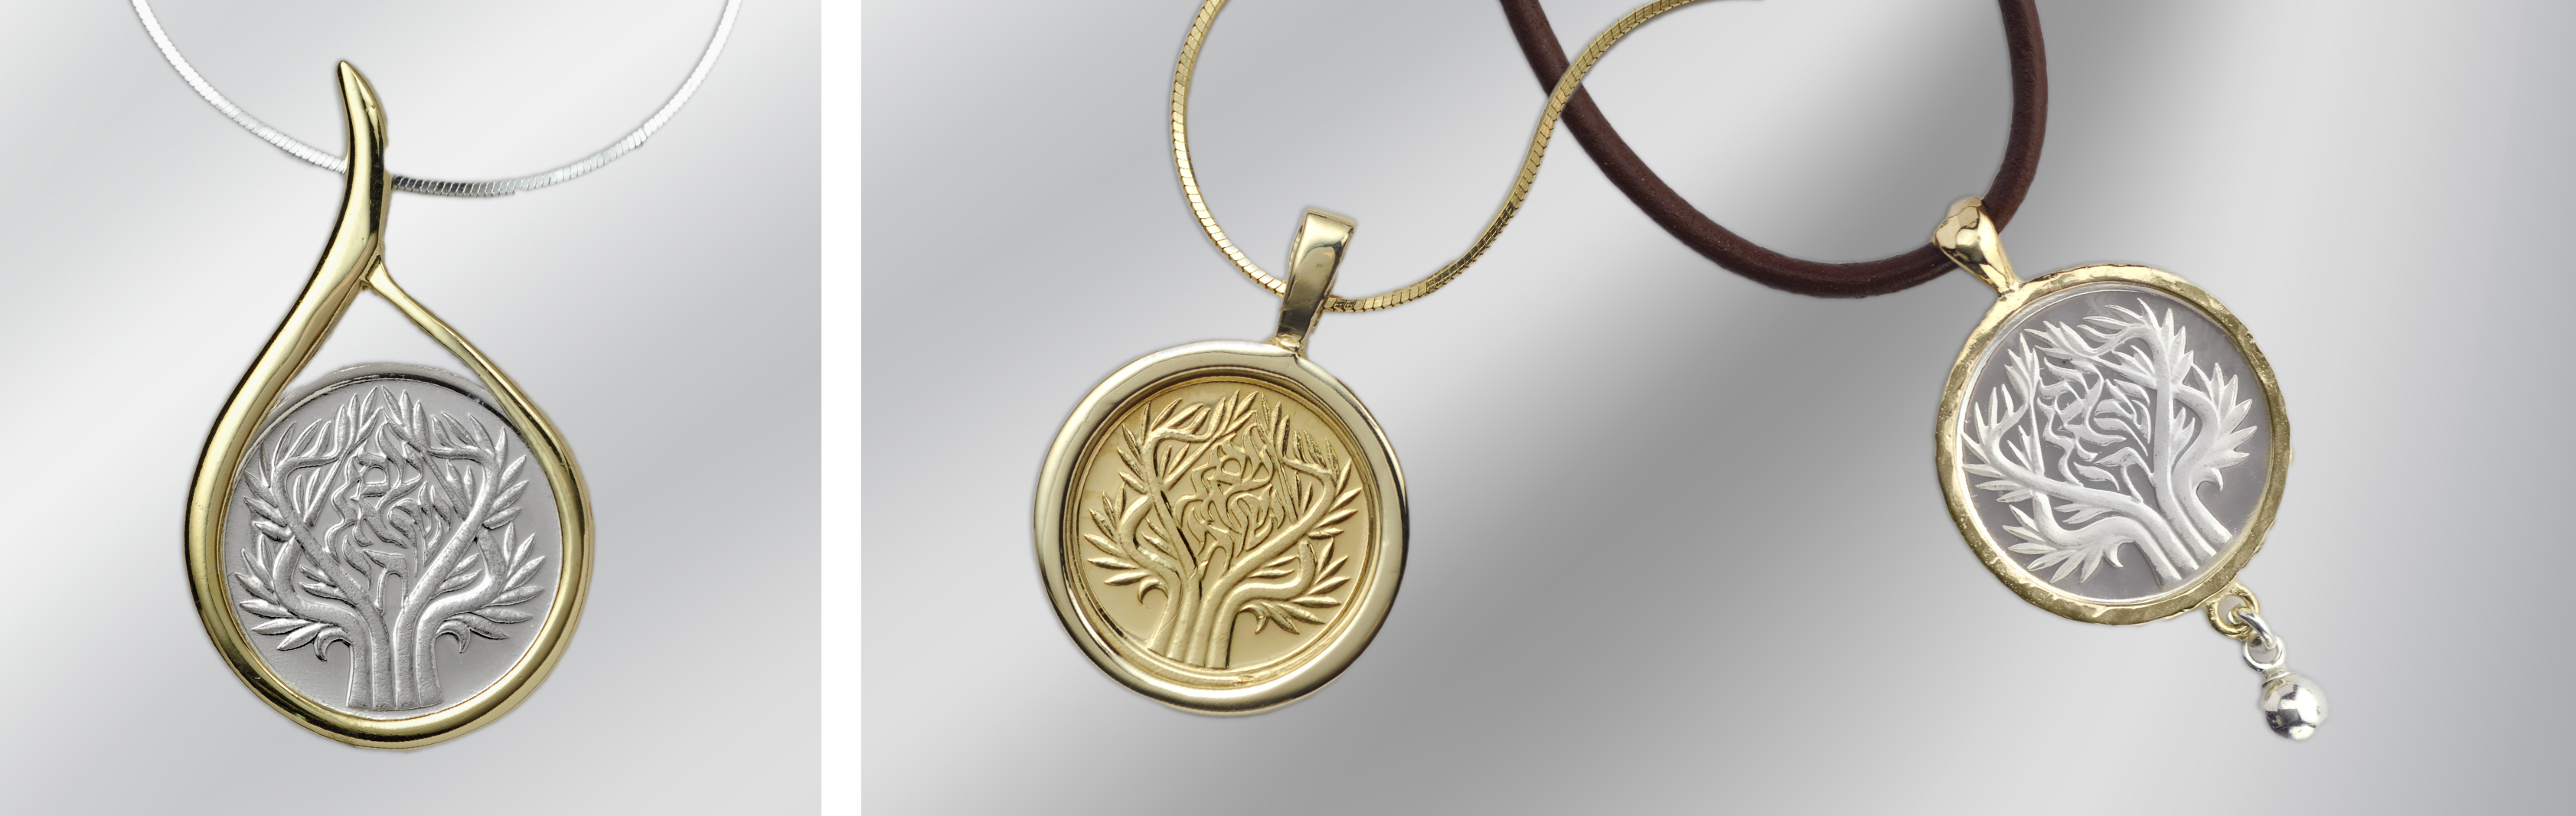 Tree of Life Adillion | State Medal set in 14K Gold and Silver Jewelry